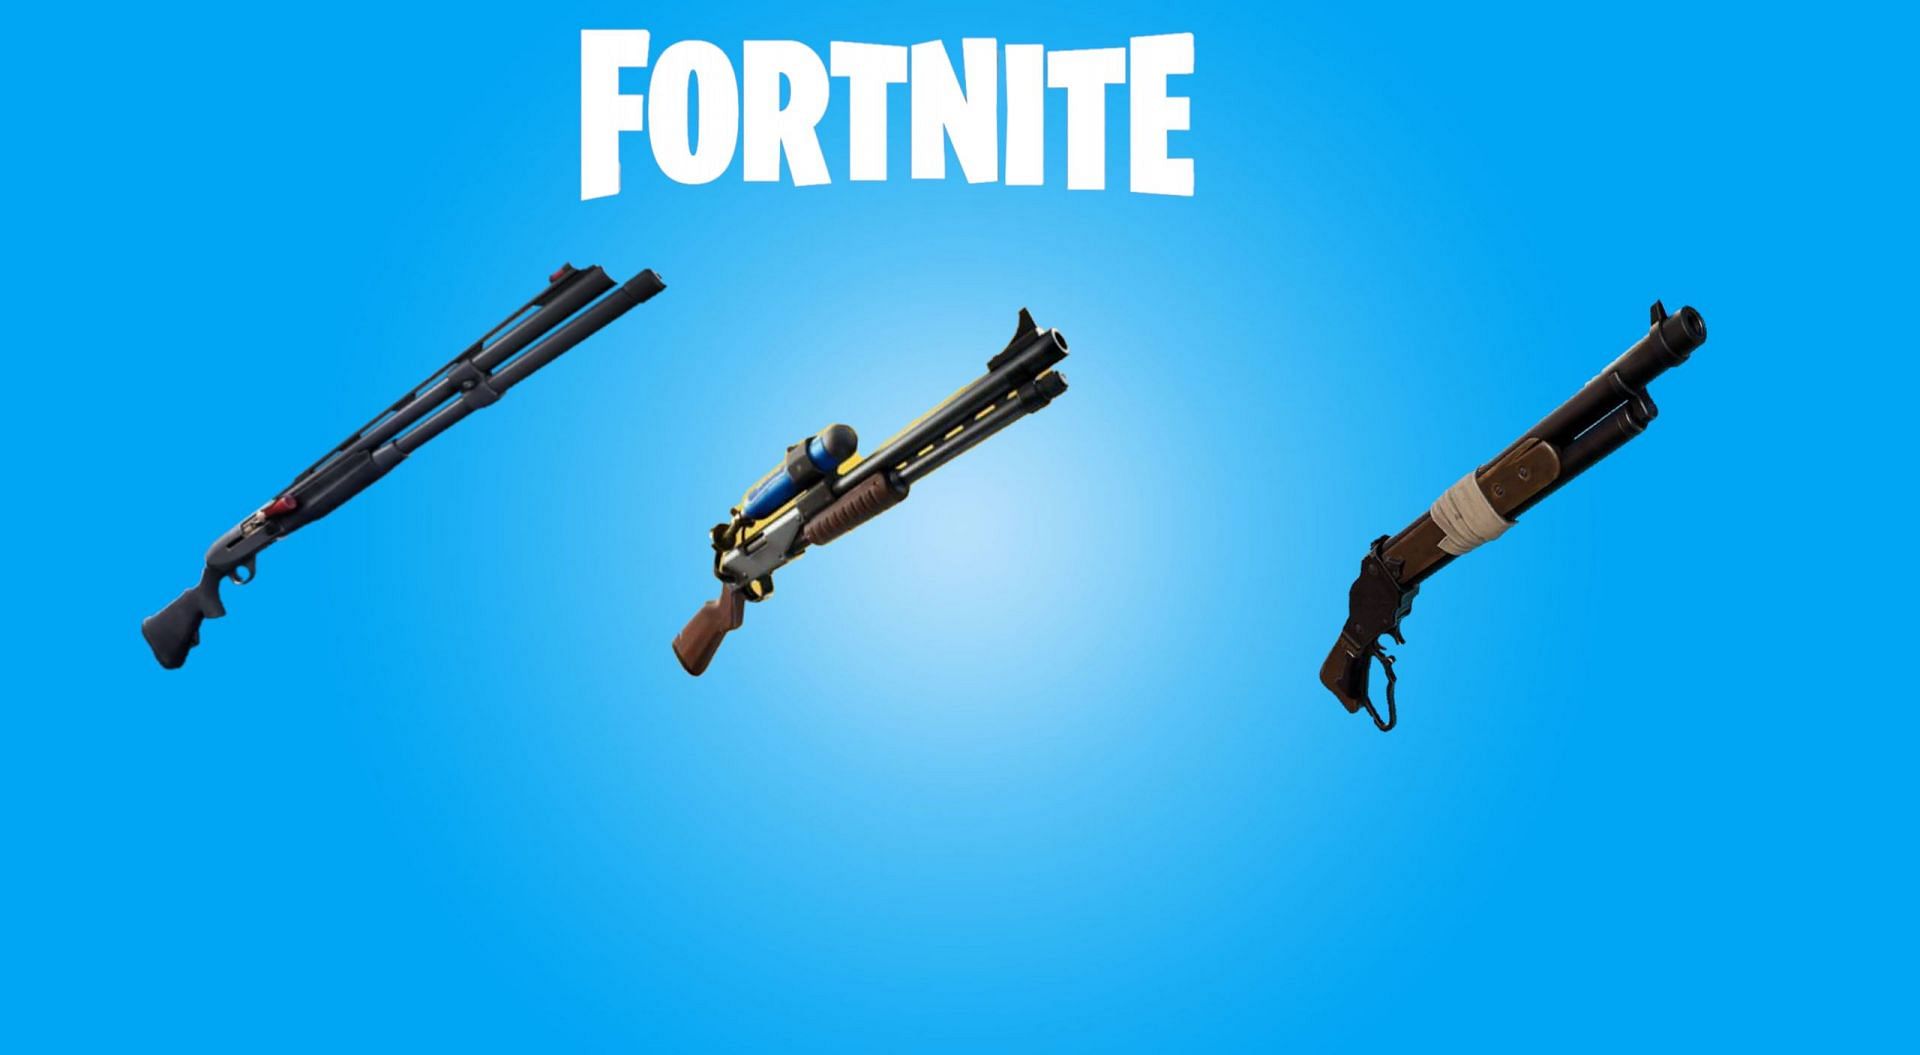 Winning Shotgun matches in Fortnite requires strategy and perfect gameplay (Image via Sportskeeda)